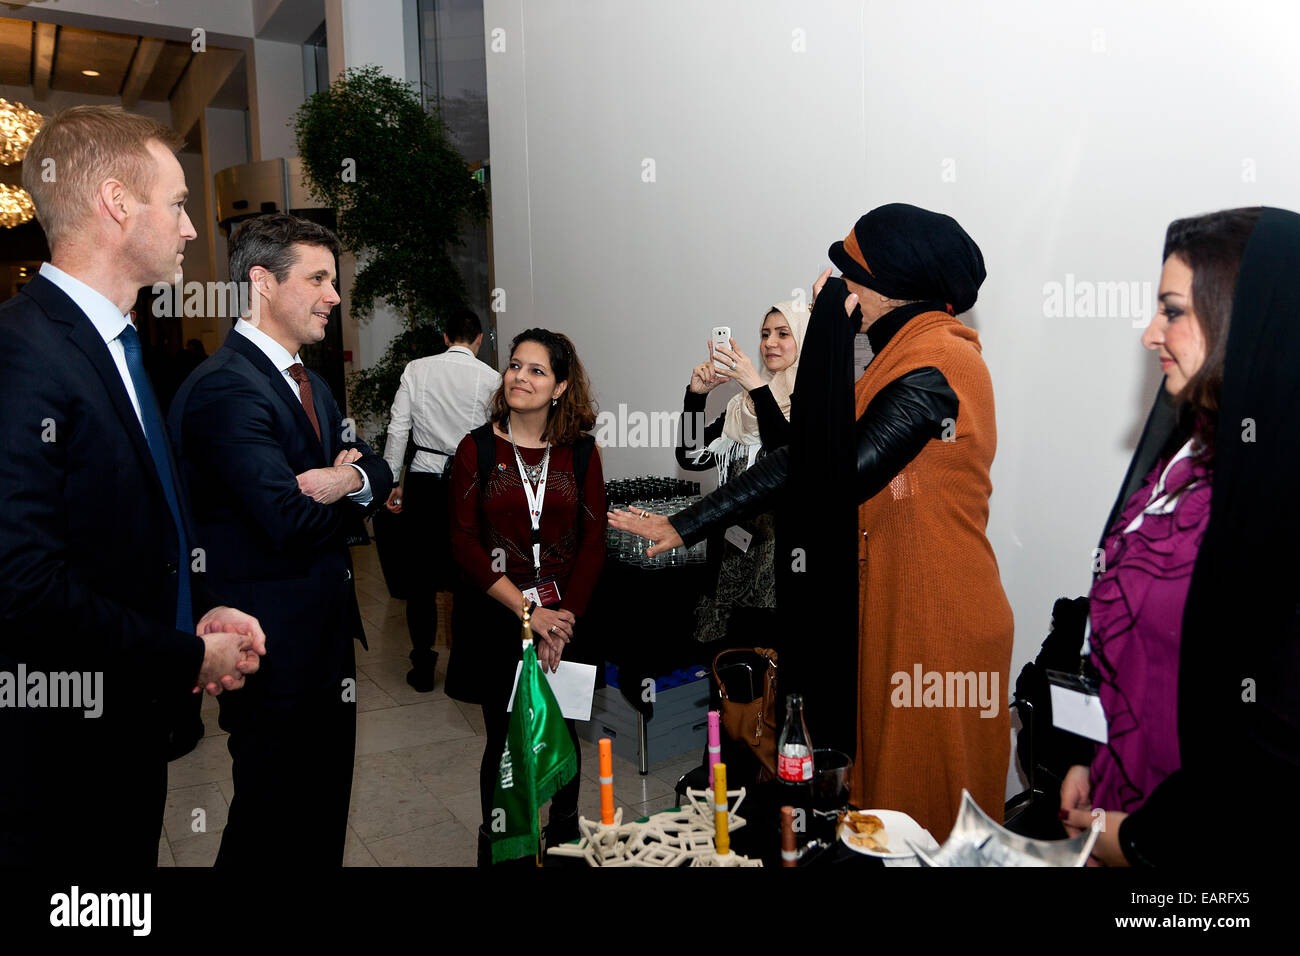 Copenhagen, Denmark, November 19th, 2014: The Danish Crown Prince Frederik (photo, 2nd left) meets representatives from the Saudi Arabian start-up company Marou during the Creative Business Cup (CBC) final in Copenhagen. The company won the national Saudi Arabian CBC competition for young creative entrepreneurs with their electronic incense stick. In this way they were qualified to participate in the CBC world finals in Copenhagen. “ Incense smoke is an important part of social life in Arab countries and this handy one you can carry everywhere,” they explained to the Crown Prince. Stock Photo